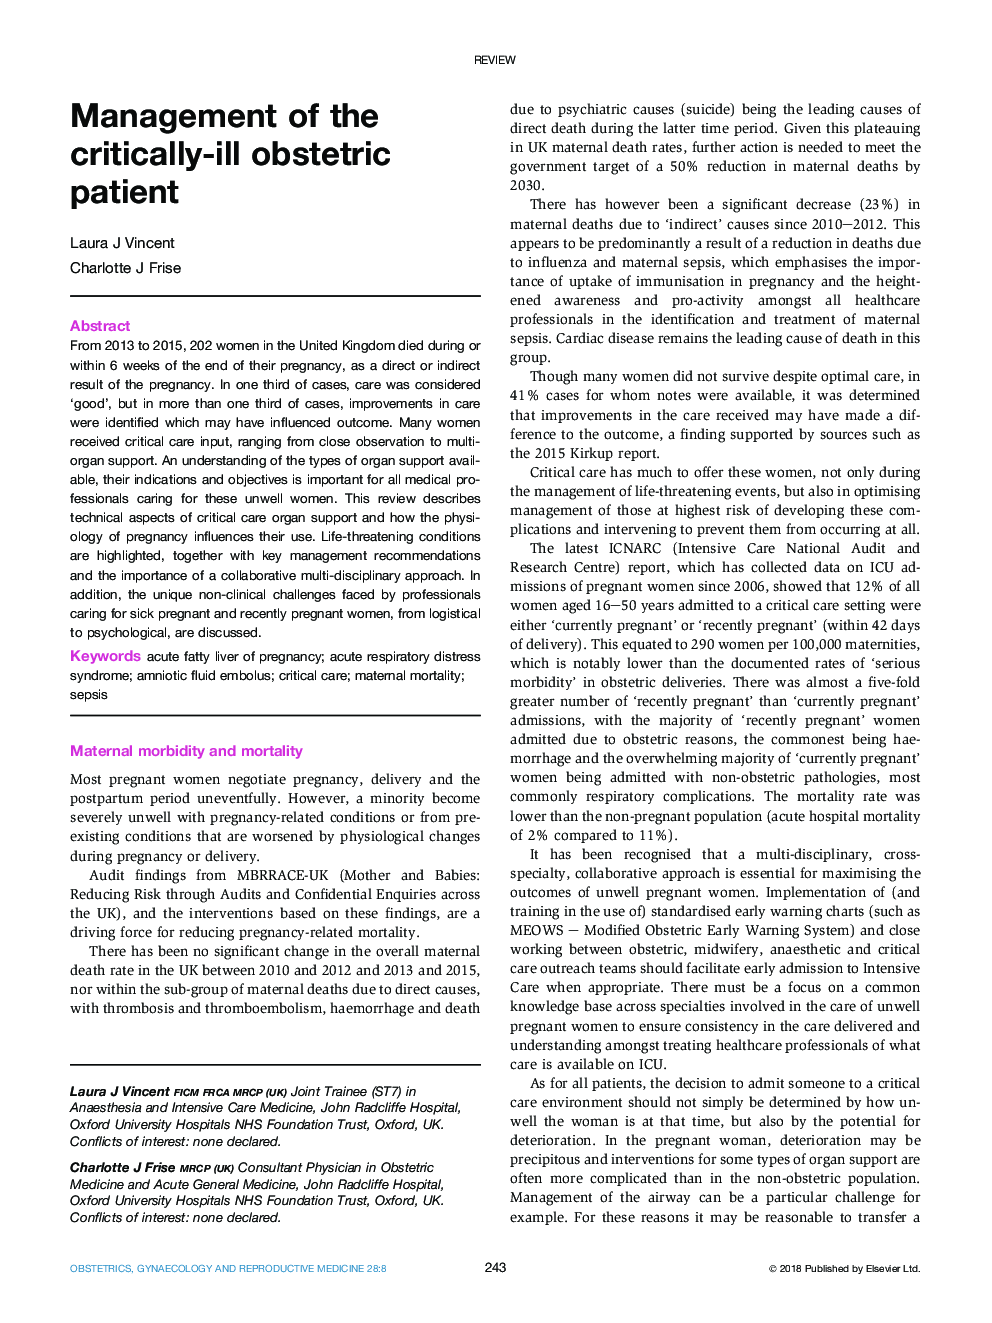 Management of the critically-ill obstetric patient